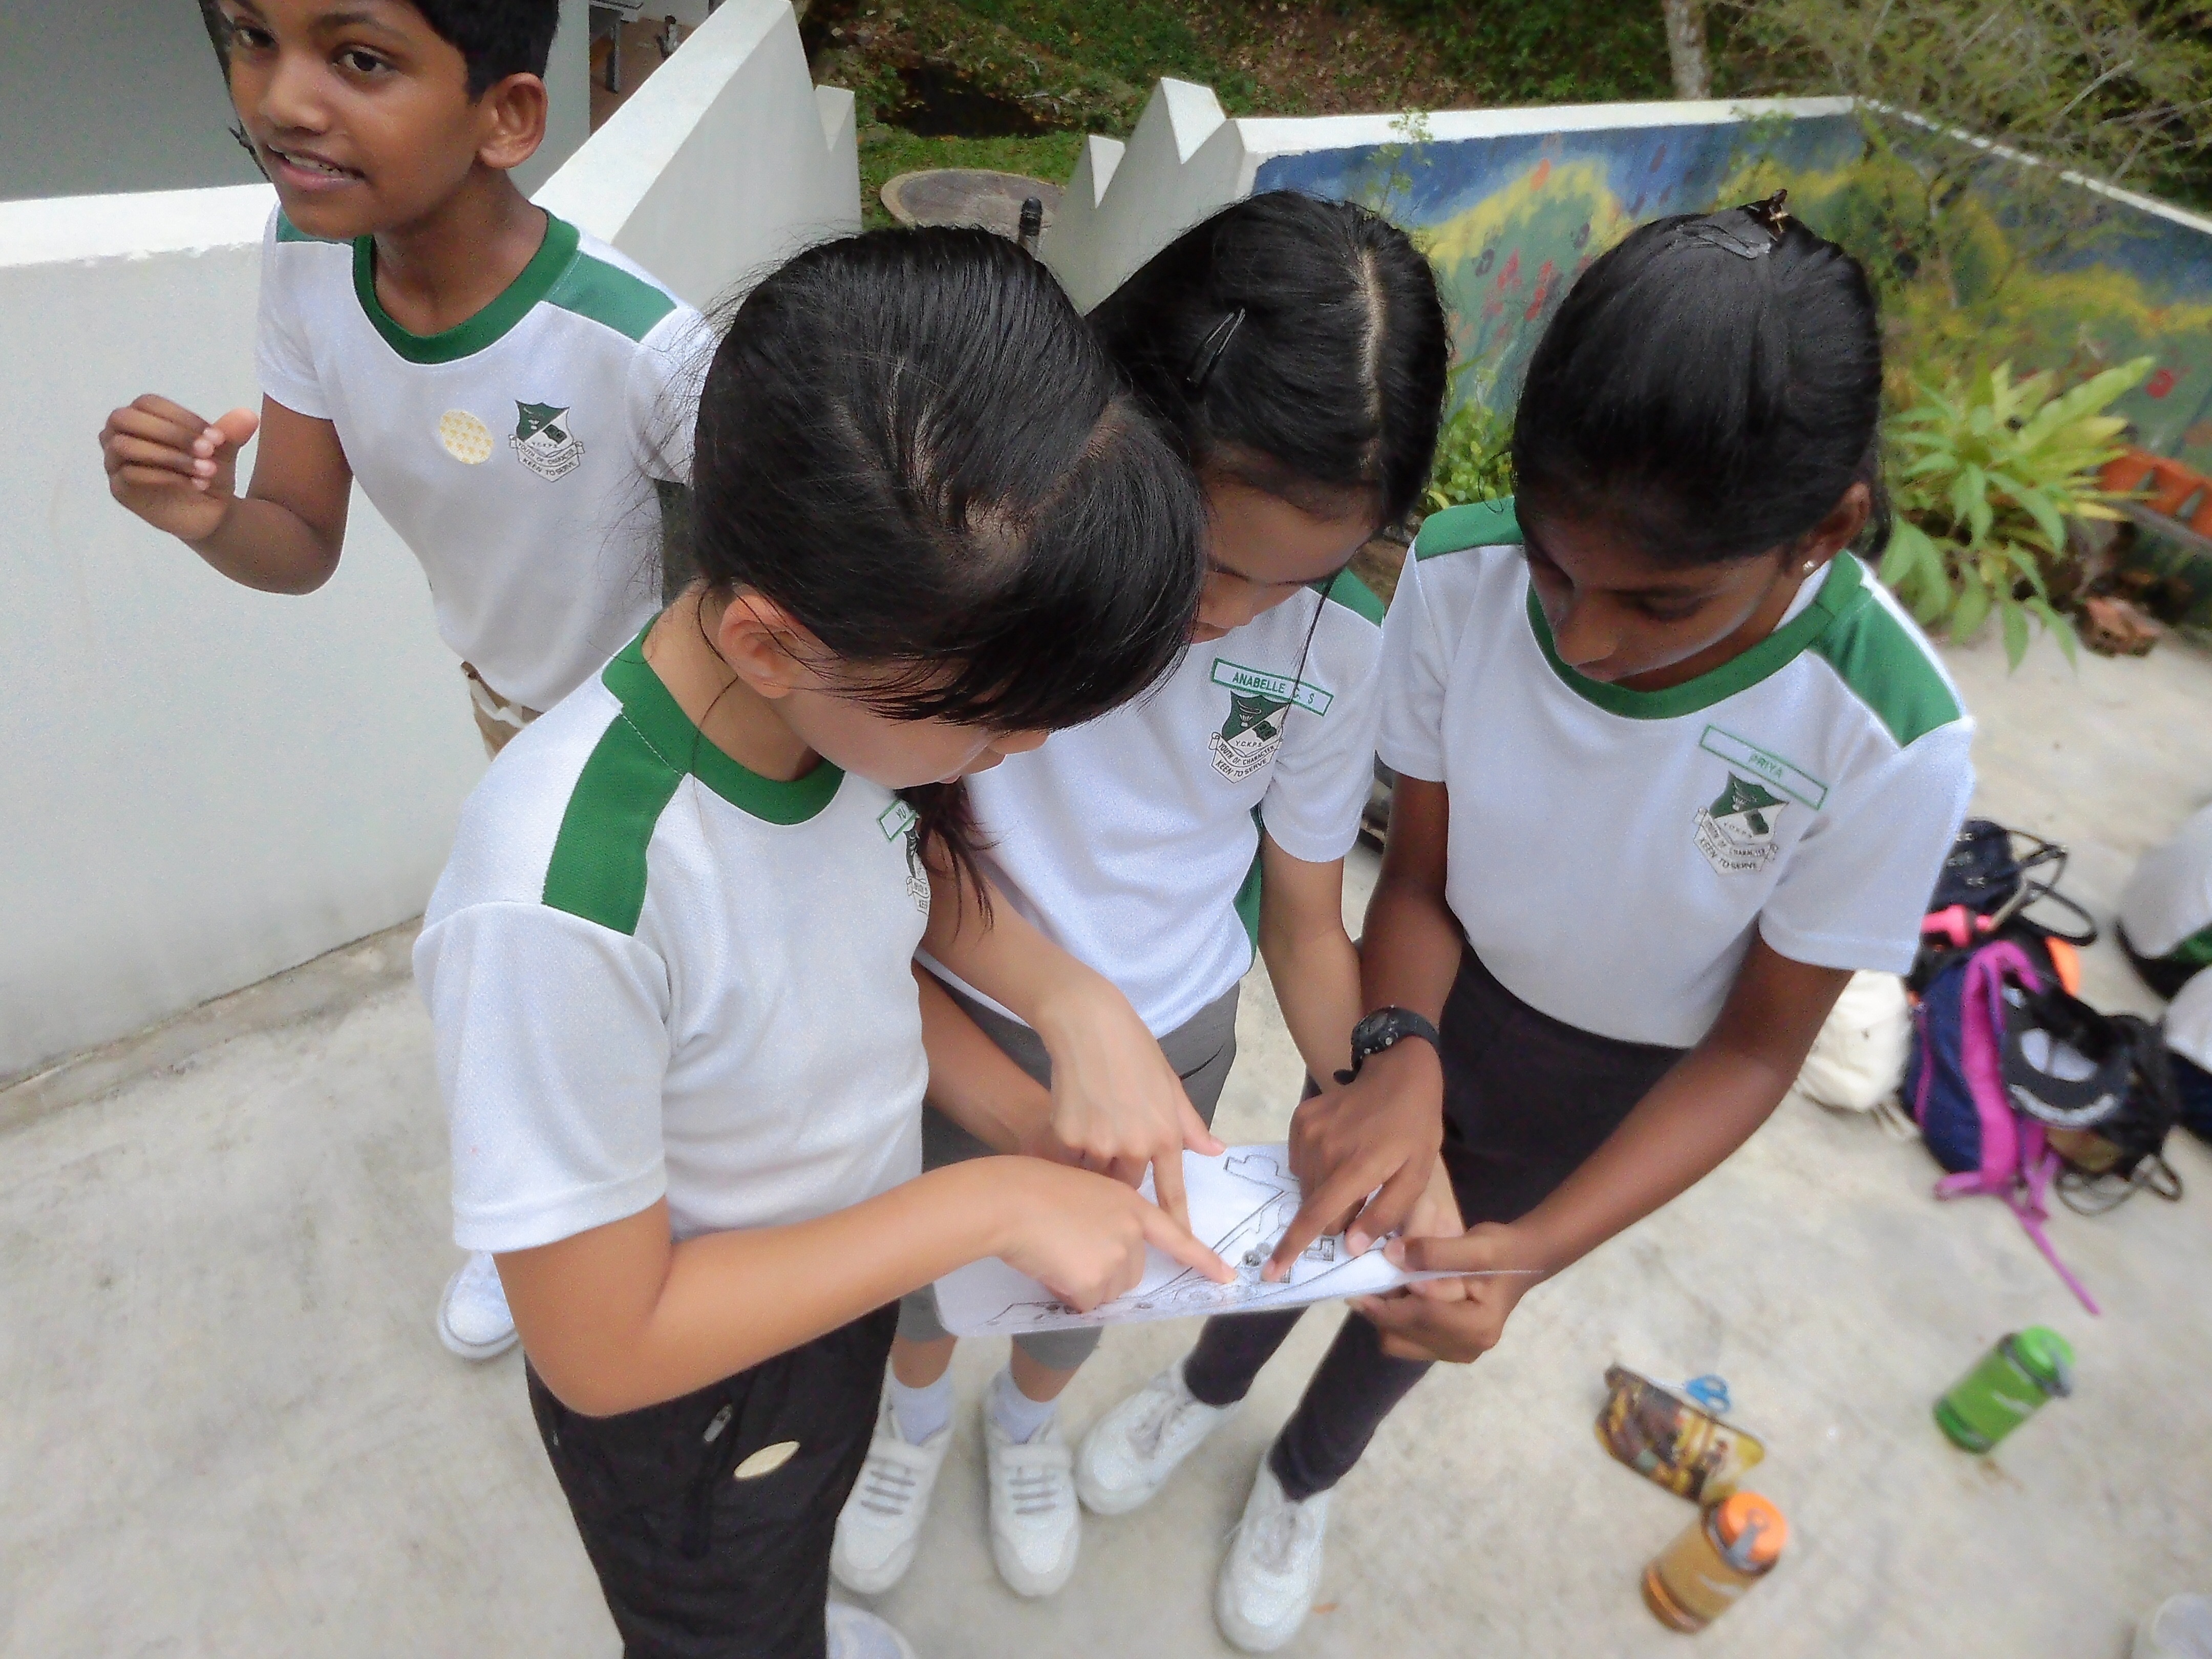 Applying navigation skills learnt in PE lesson during the camp.